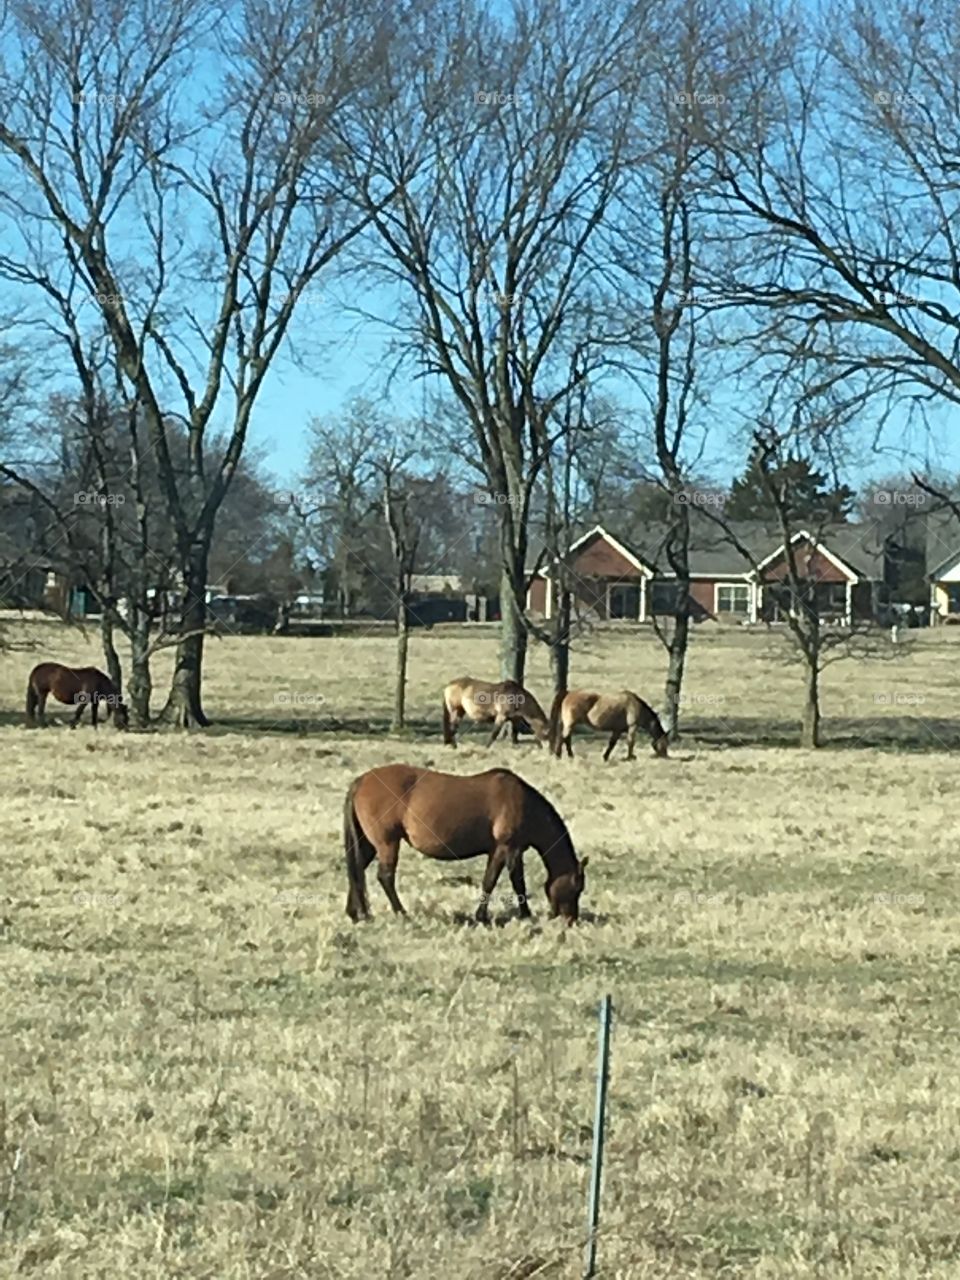 Love watching these horses when we drive by. Last year’s babies have grown up. Beautiful 